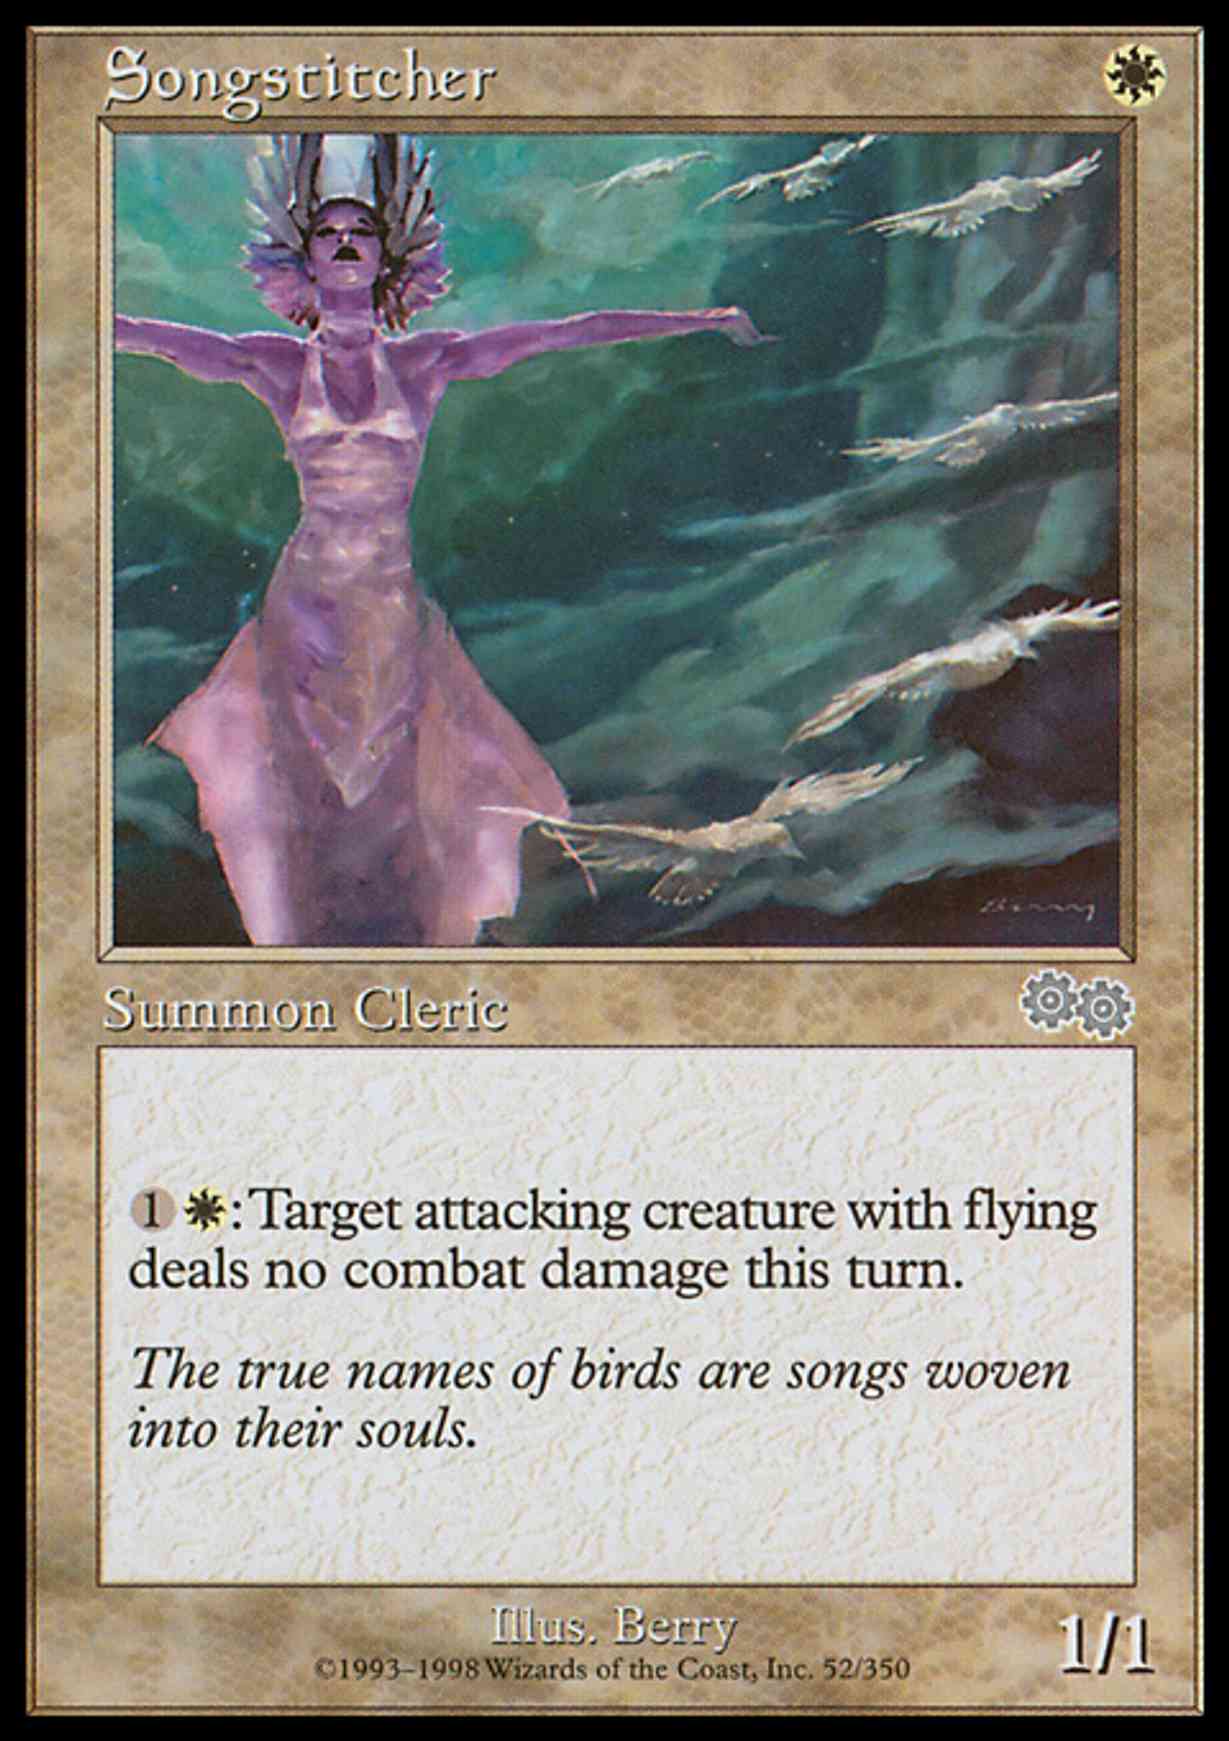 Songstitcher magic card front